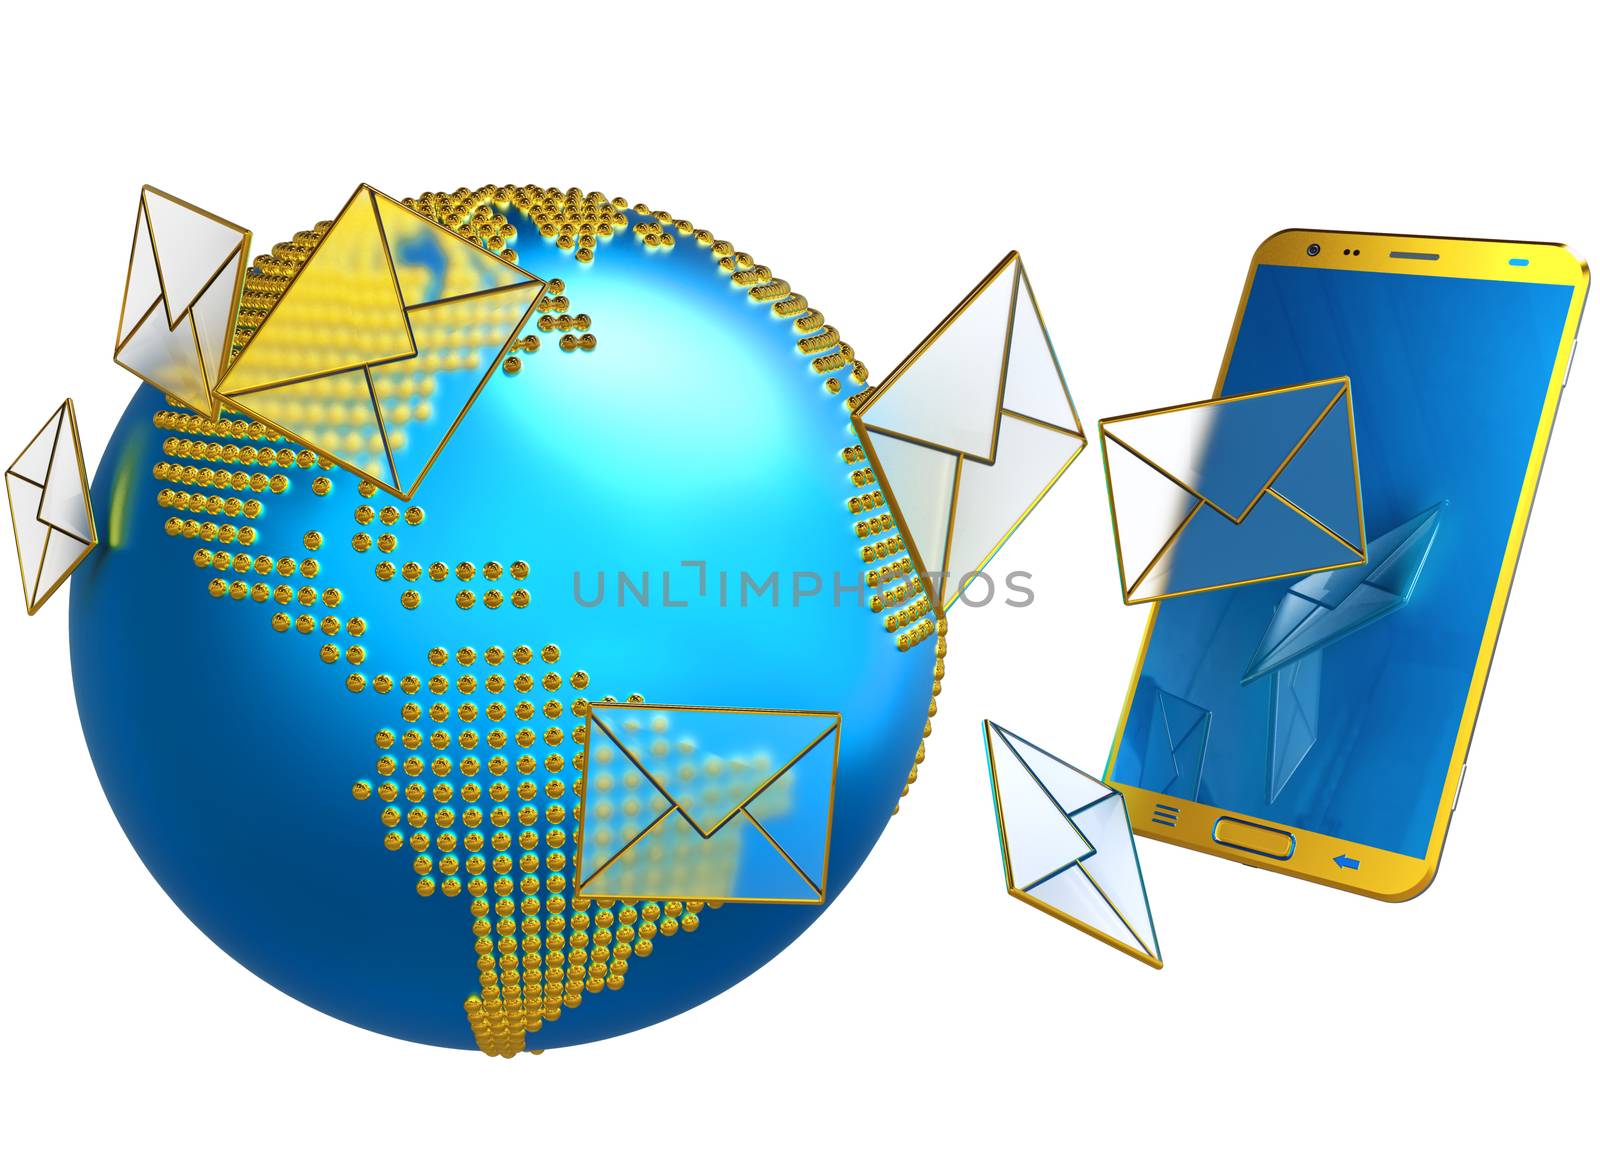 A lot of envelopes, as e-mail or sms, sent to the mobile phone with blue screen. 3d illustration concept background.